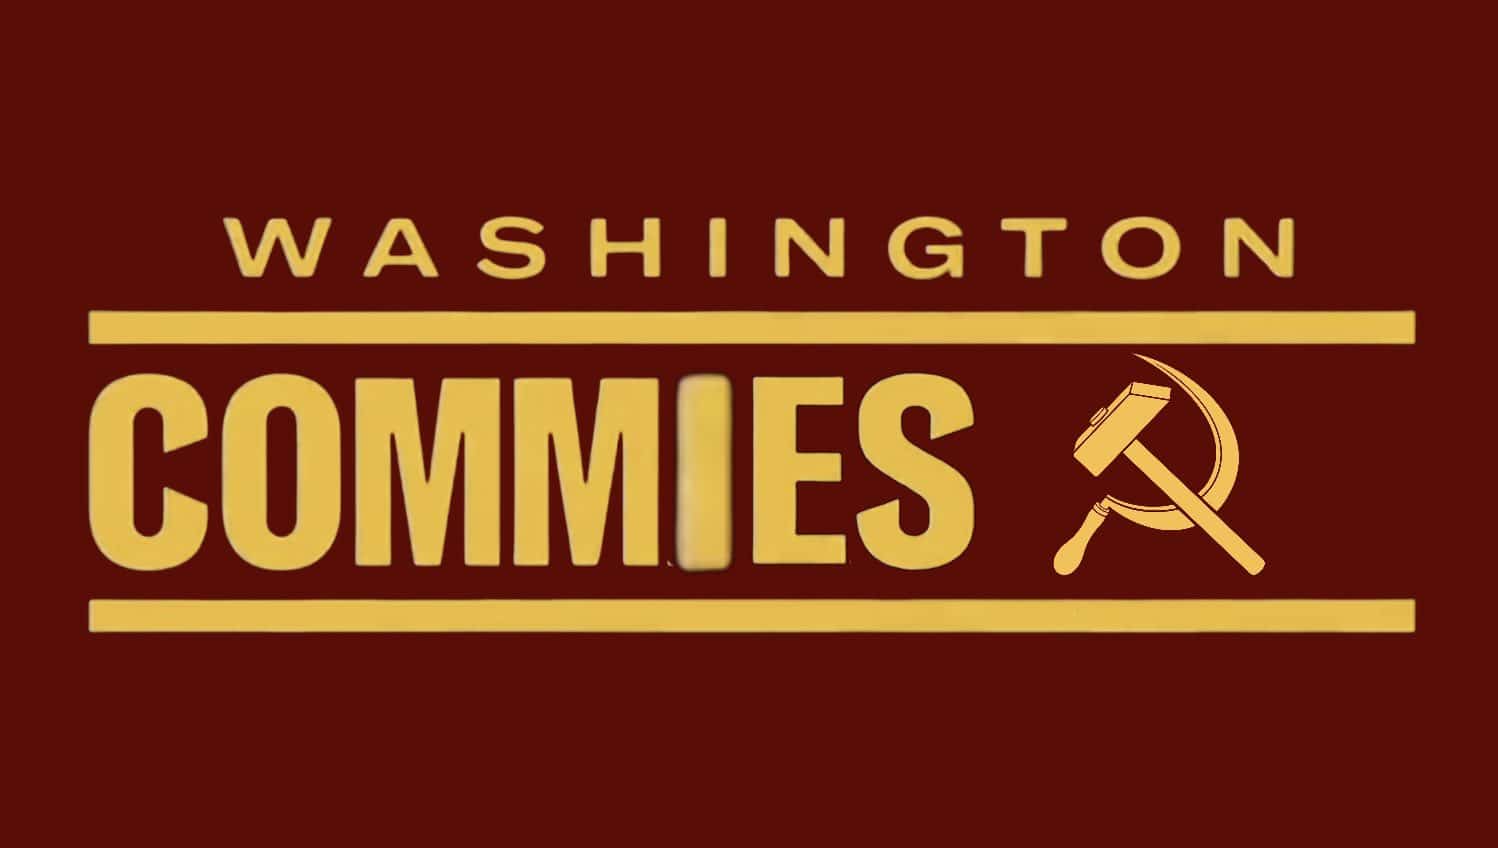 Josh Harris and Company Make a $6 Billion Offer for the Commies